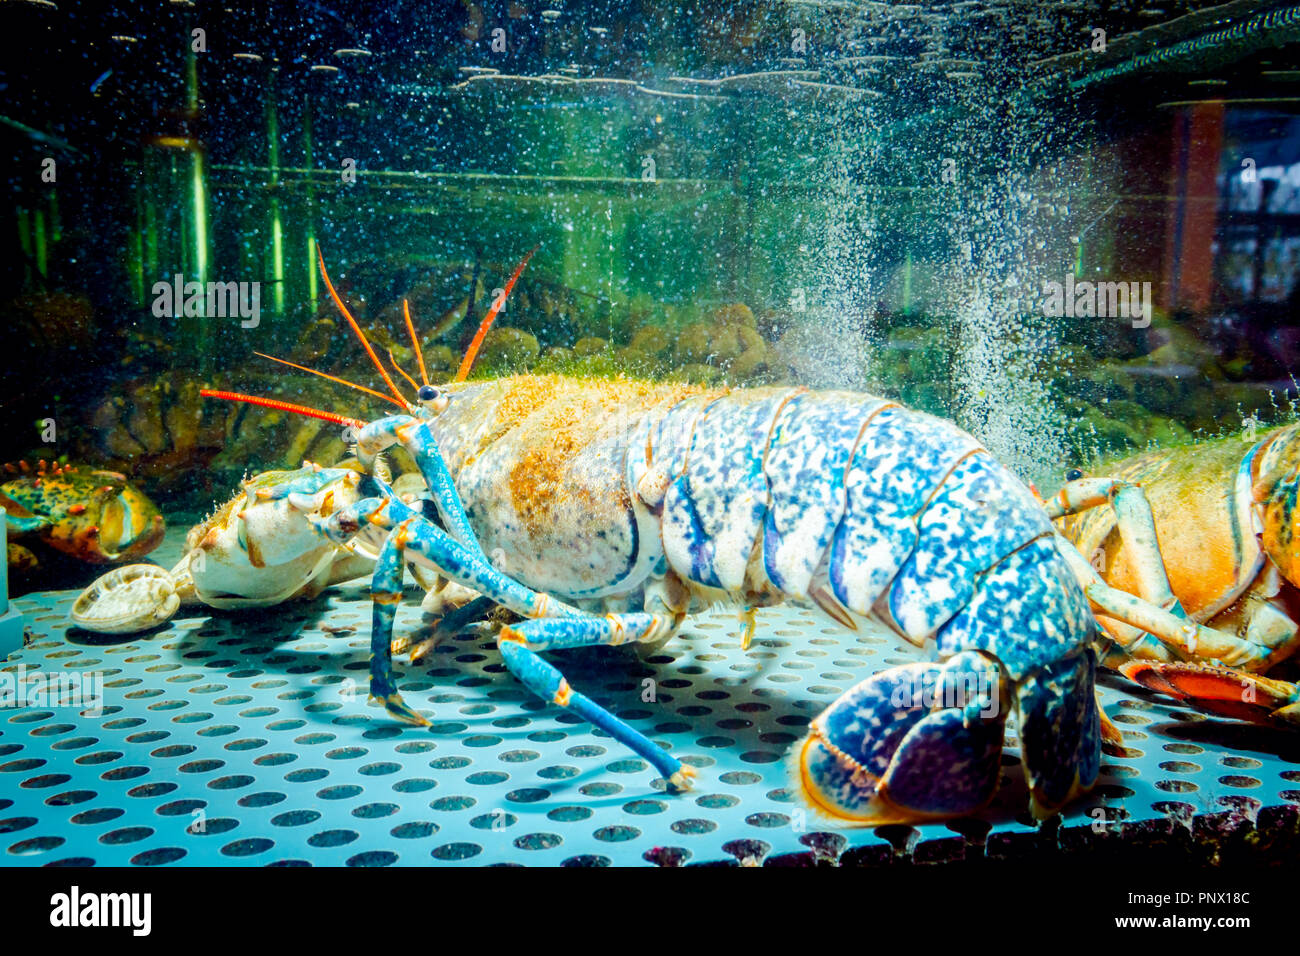 Live exotic and expensive crayfish with tied claws are in aquarium, tank at traditional seafood restaurant for sale. Stock Photo